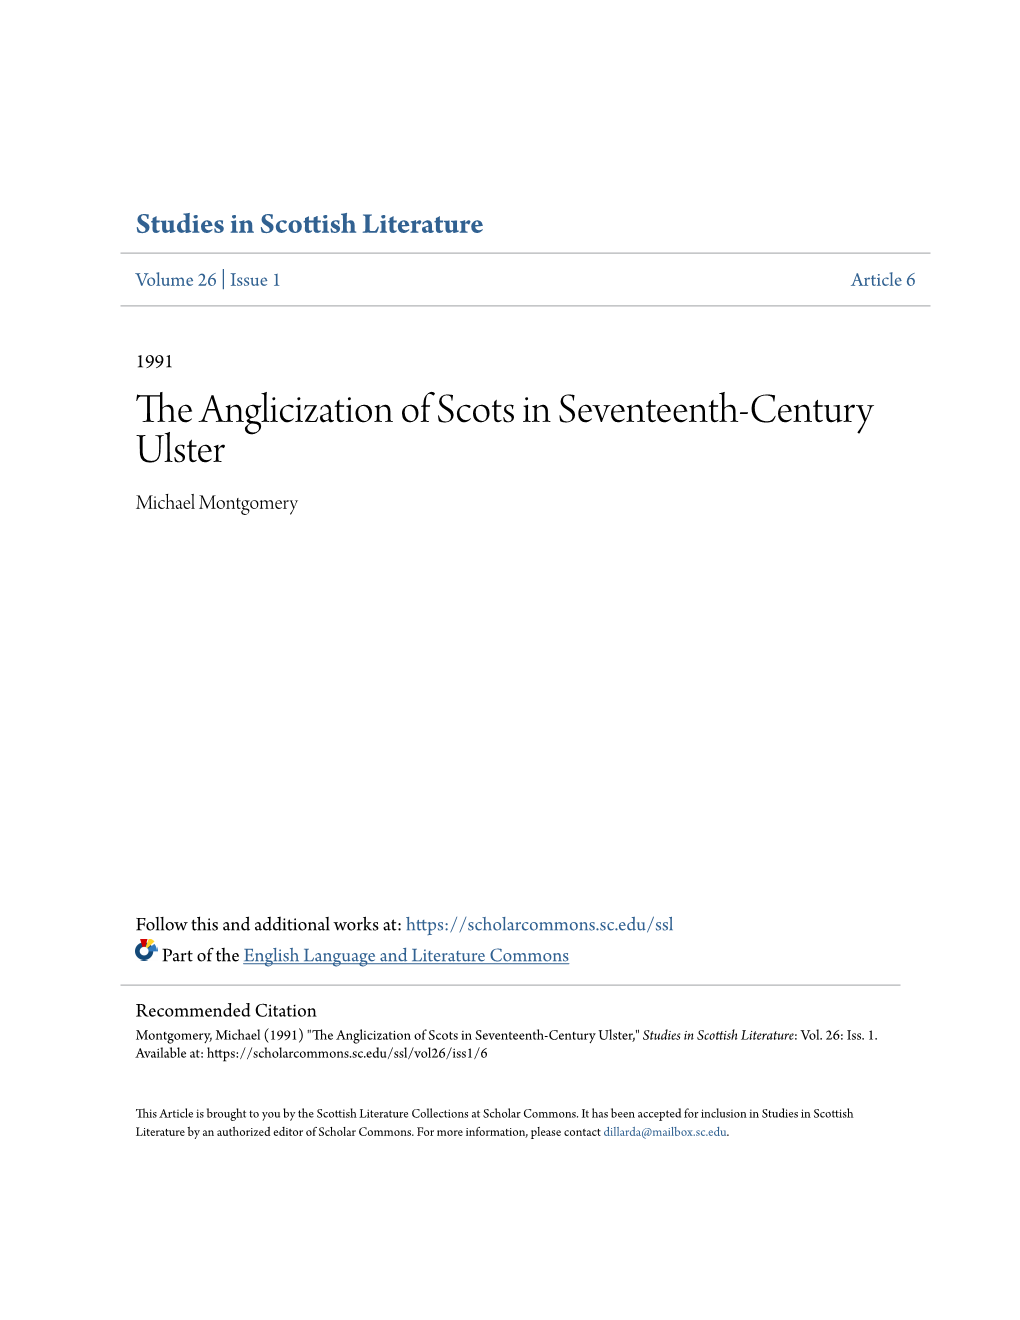 The Anglicization of Scots in Seventeenth-Century Ulster Michael Montgomery